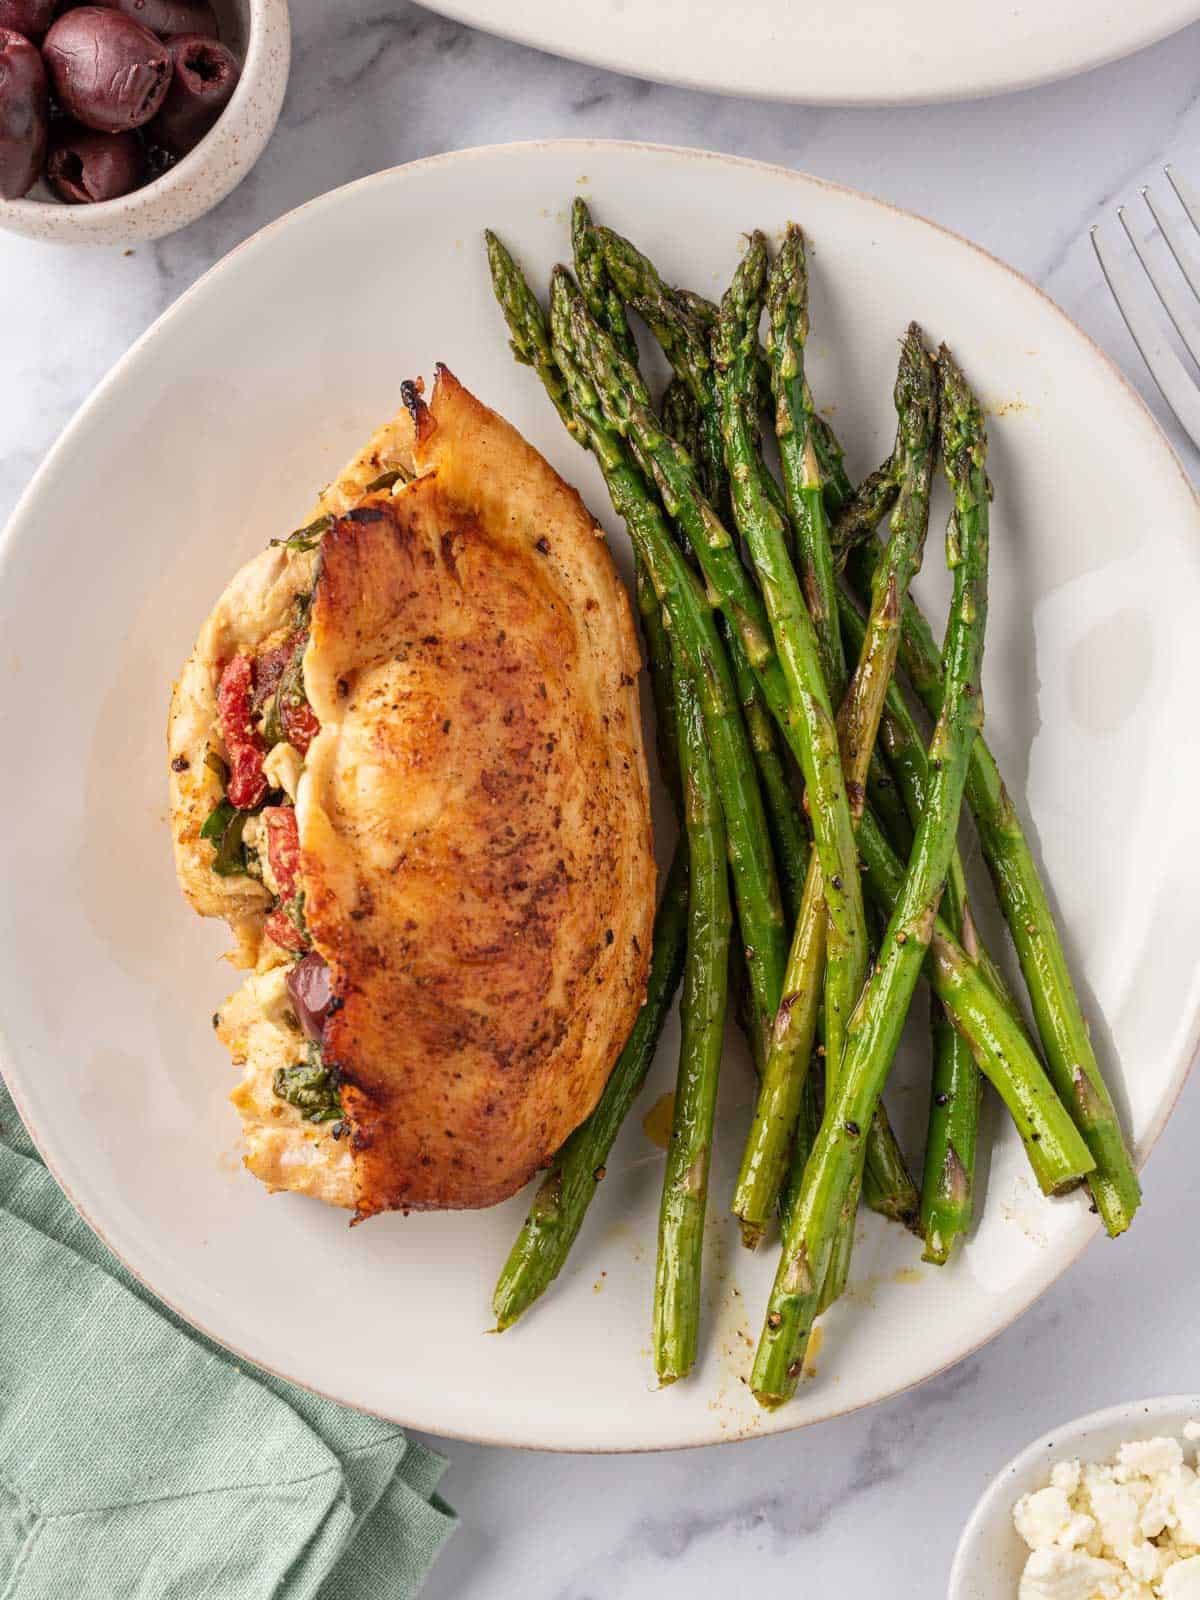 A plate of asparagus with Mediterranean stuffed chicken breast.